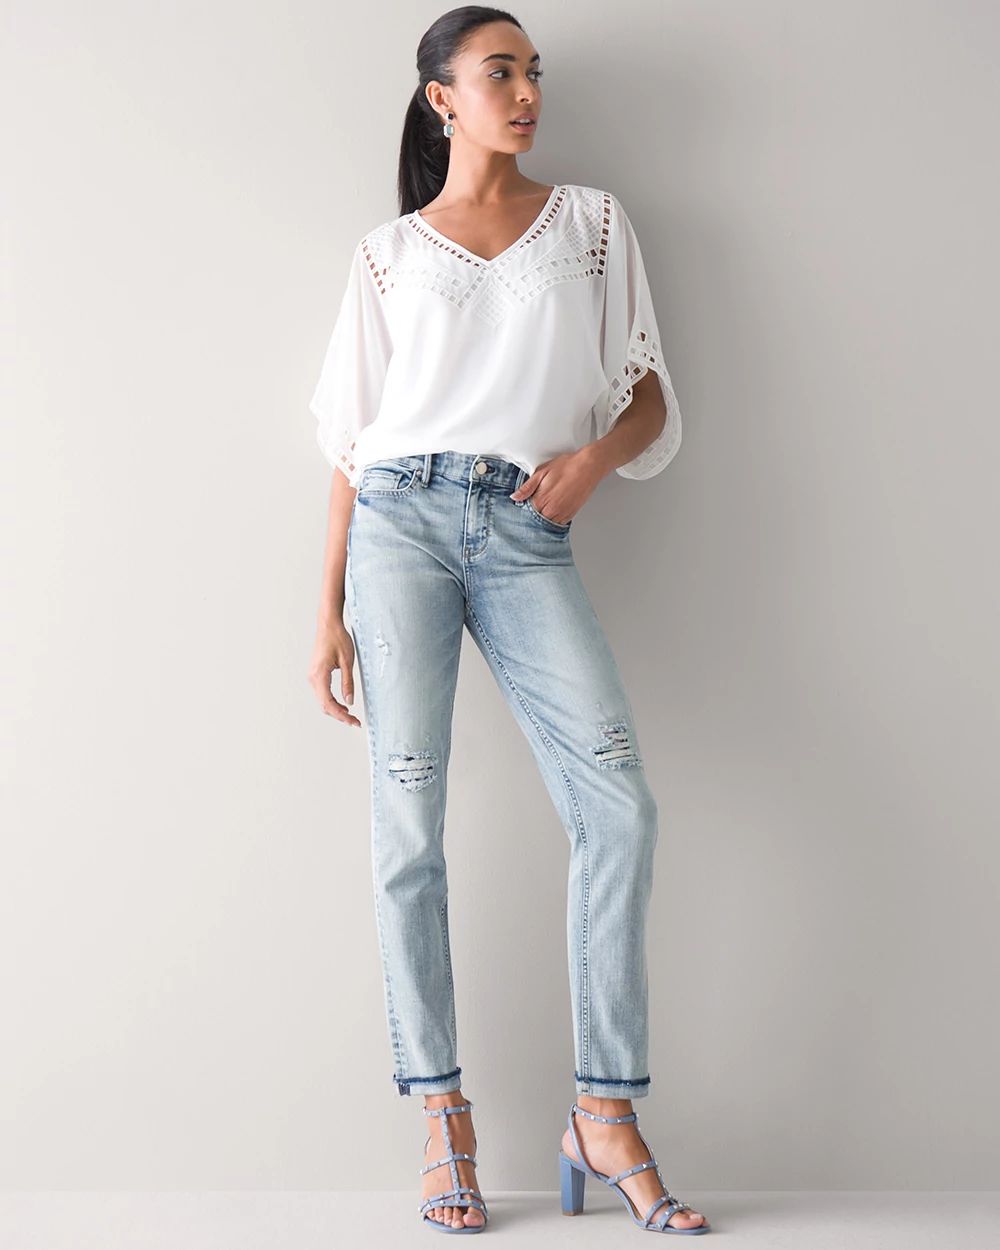 Mid-Rise Everyday Soft Denim™ Destructed Girlfriend Jeans click to view larger image.